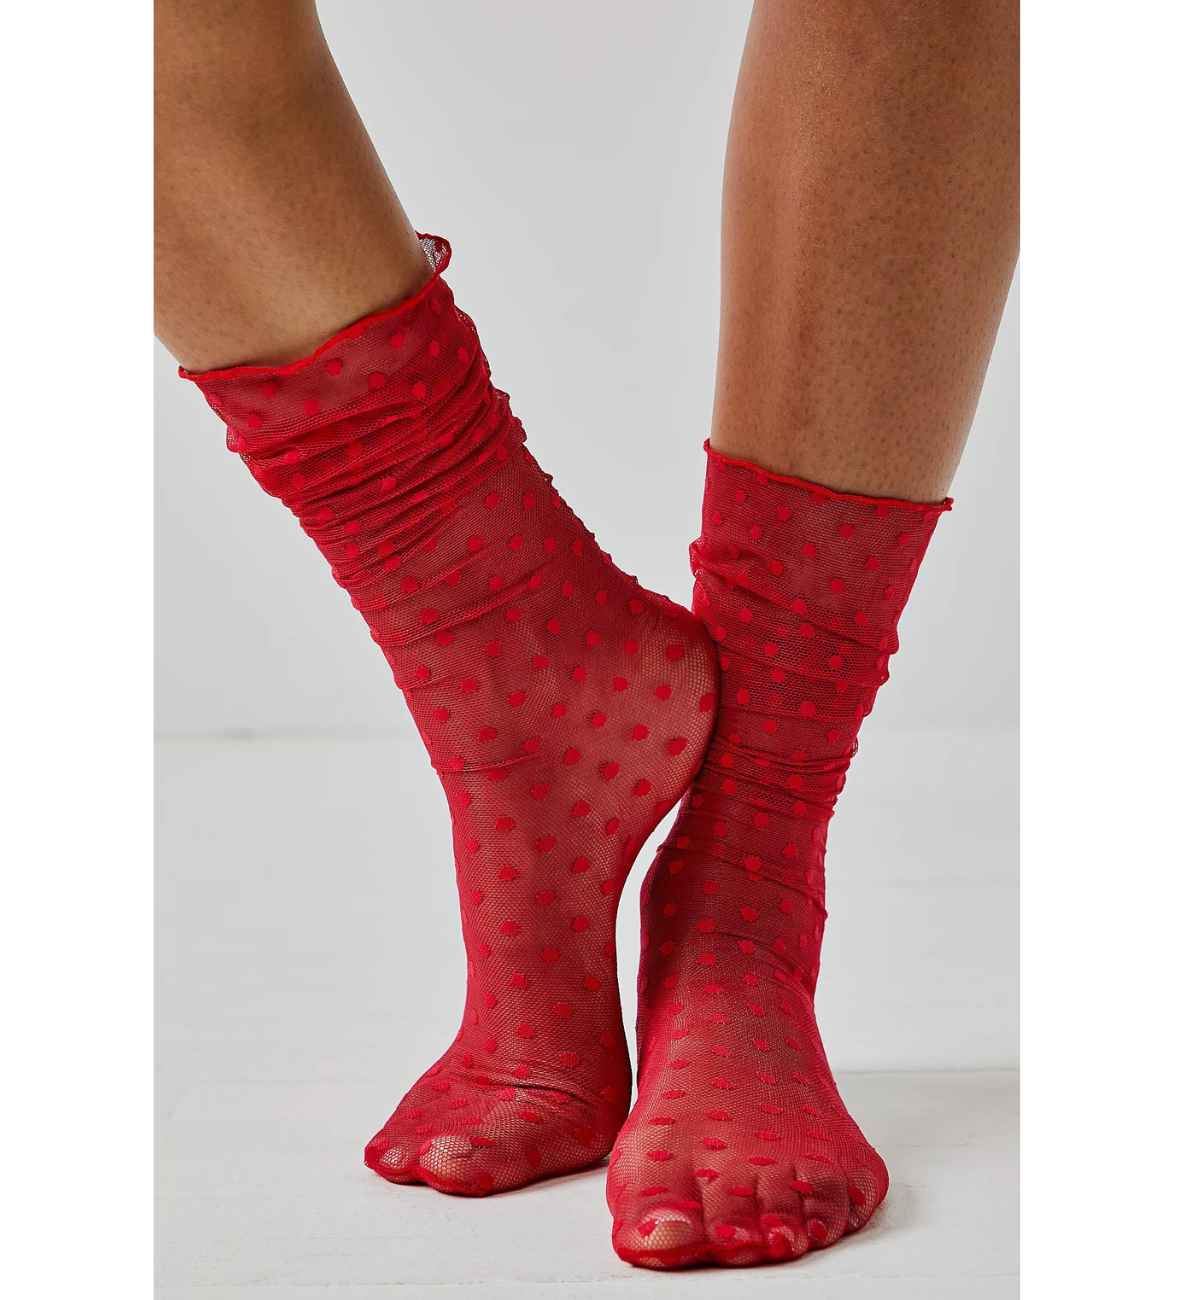 Women wearing red heart socks with polkadot pattern all over on white background.